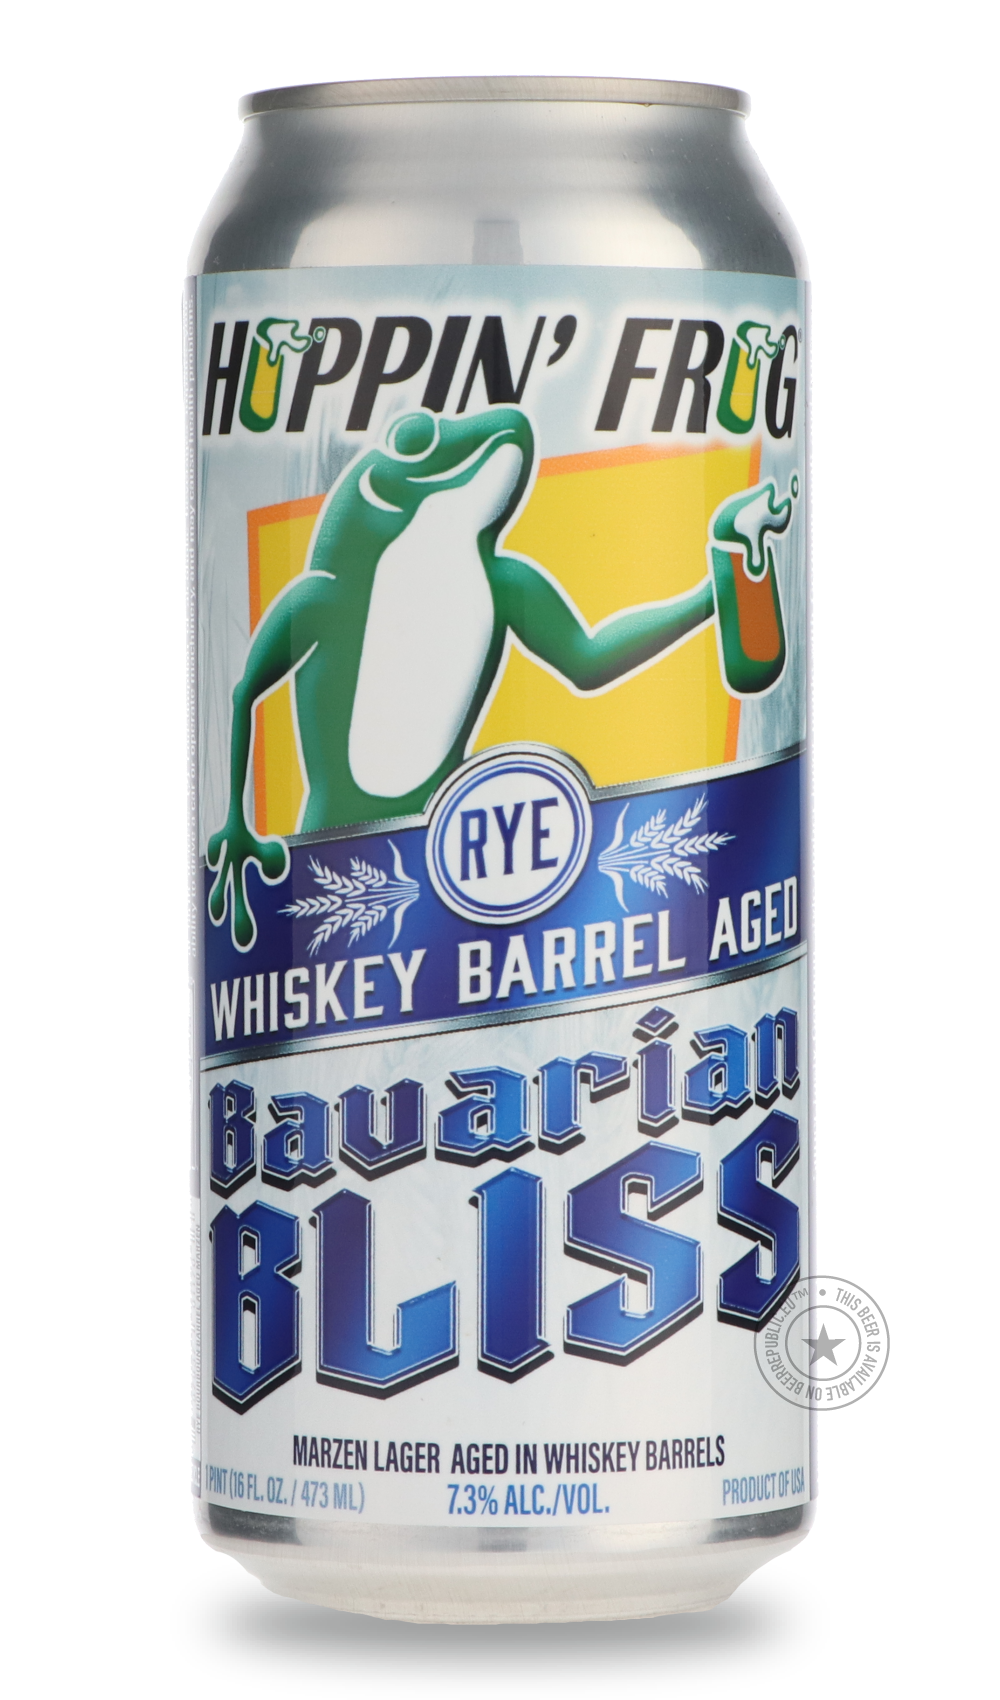 -Hoppin' Frog- Rye Whiskey Barrel Aged Bavarian Bliss-Brown & Dark- Only @ Beer Republic - The best online beer store for American & Canadian craft beer - Buy beer online from the USA and Canada - Bier online kopen - Amerikaans bier kopen - Craft beer store - Craft beer kopen - Amerikanisch bier kaufen - Bier online kaufen - Acheter biere online - IPA - Stout - Porter - New England IPA - Hazy IPA - Imperial Stout - Barrel Aged - Barrel Aged Imperial Stout - Brown - Dark beer - Blond - Blonde - Pilsner - Lag